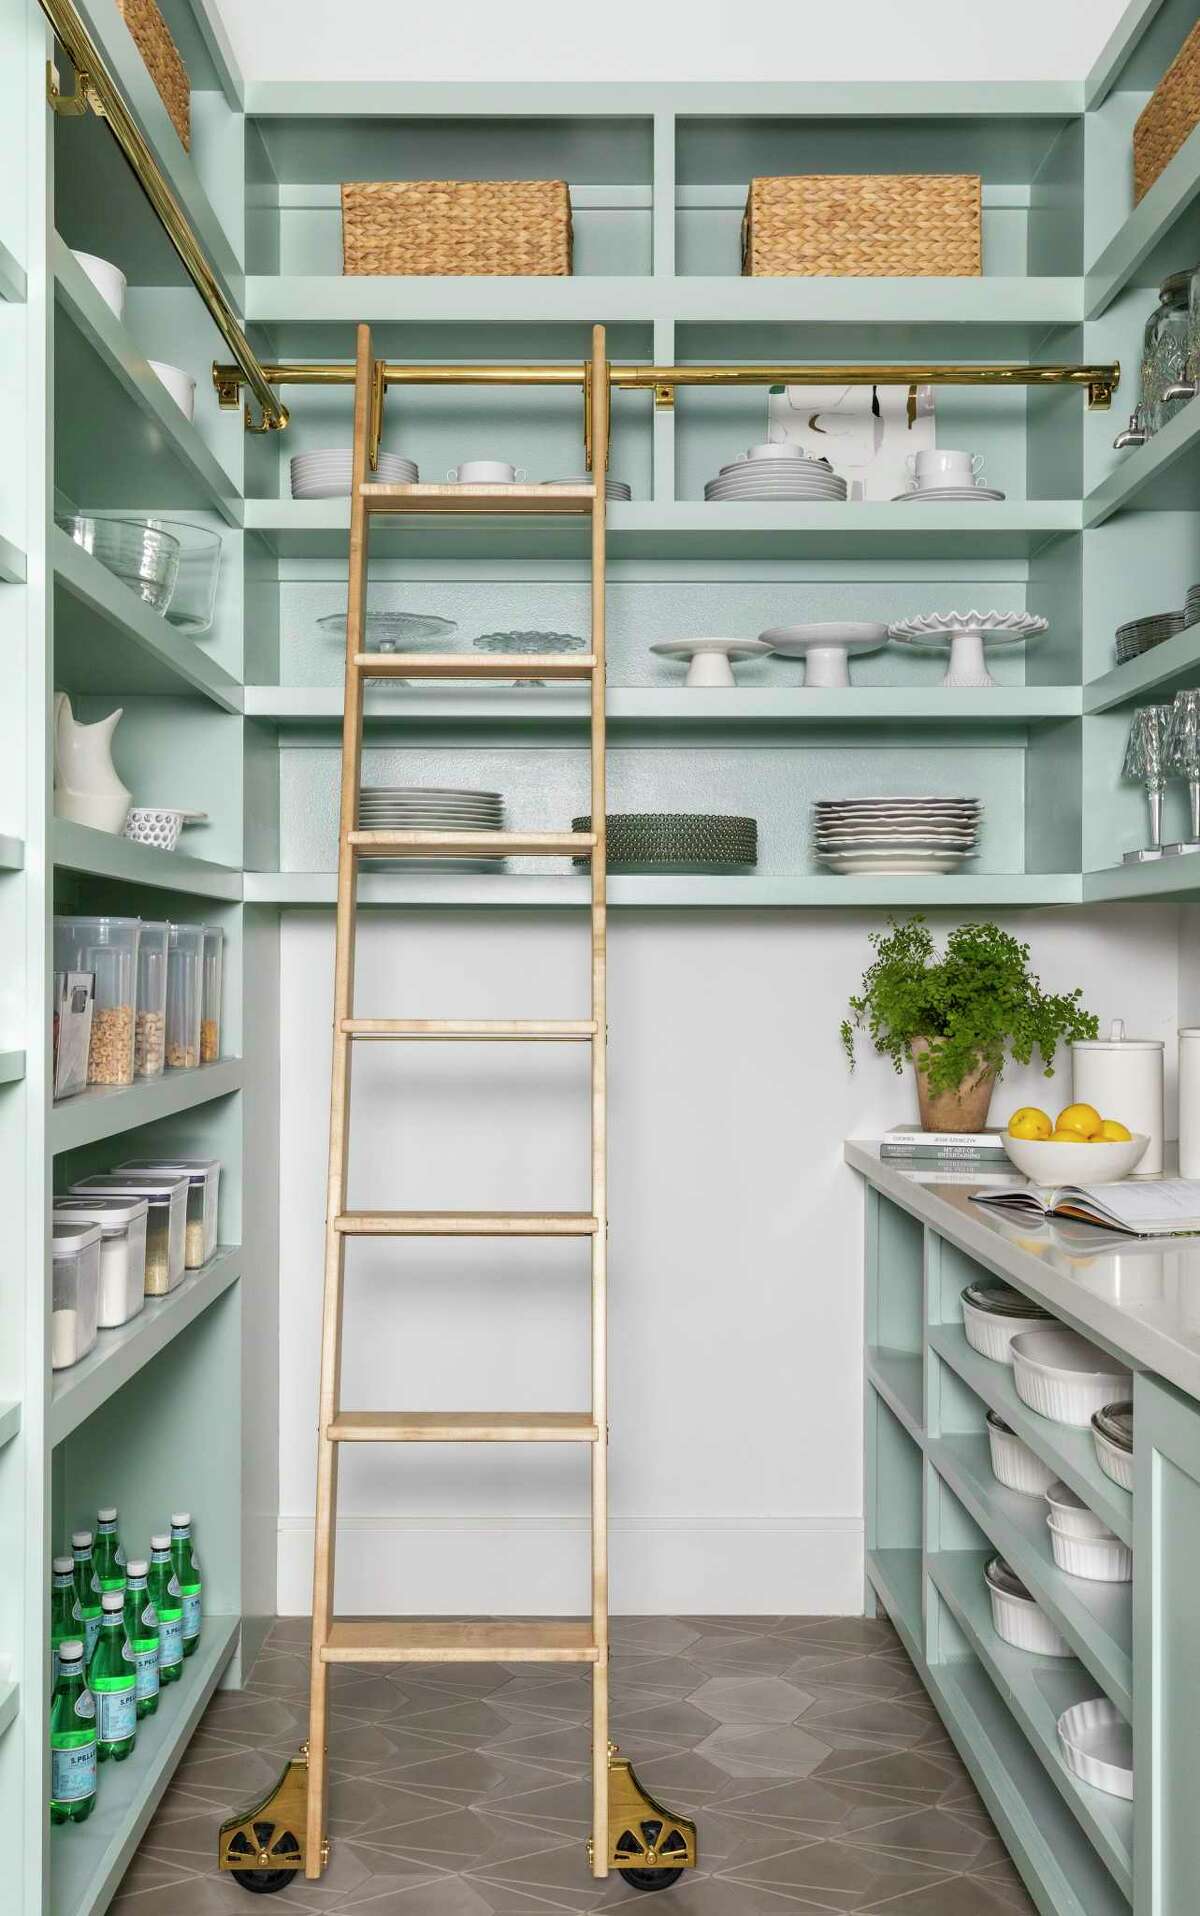 Green paint adds bright personality to the kitchen pantry.